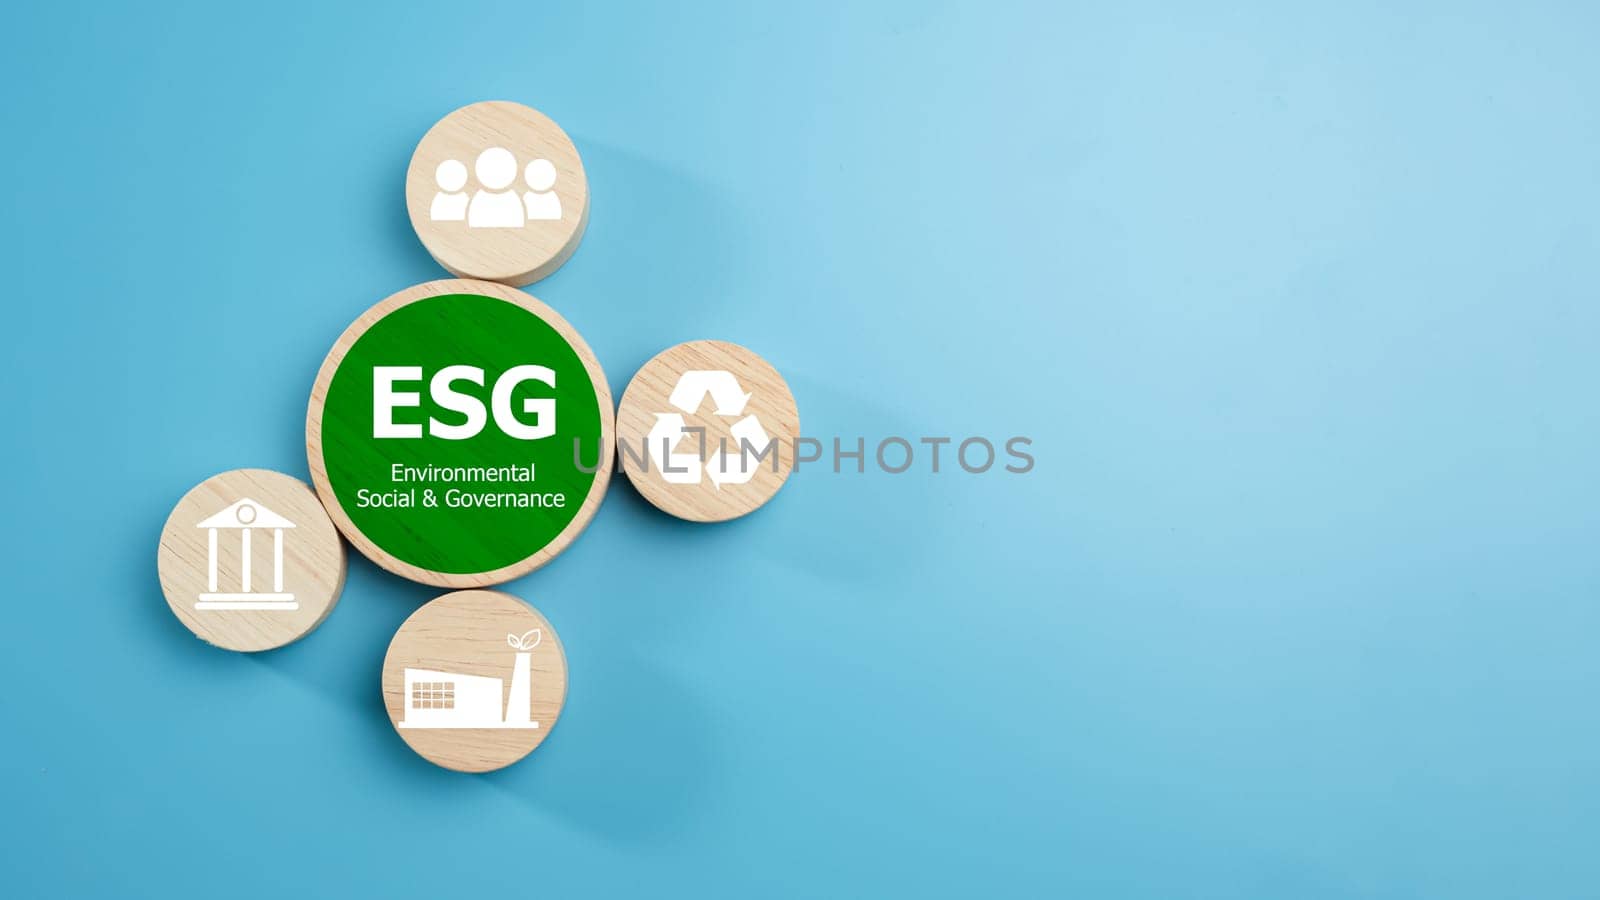 ESG concepts for sustainable environment, society and governance Businesses are environmentally responsible, A circular wooden board with the abbreviation ESG printed on a light blue background. by Unimages2527